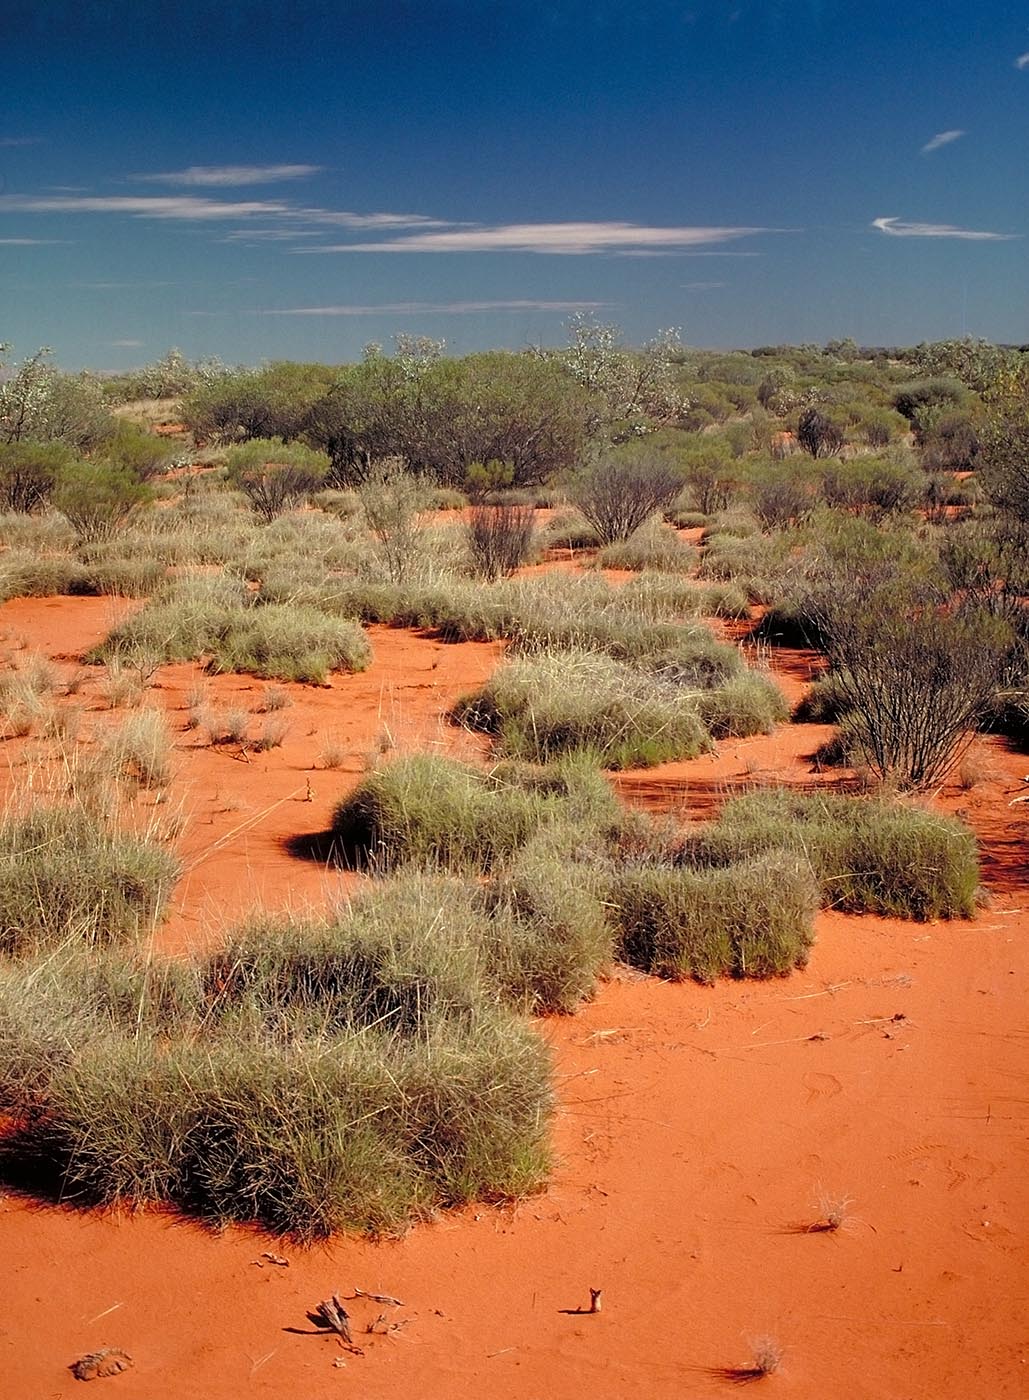 Circular clumps of greyish-green grass on red desert sand. - click to view larger image